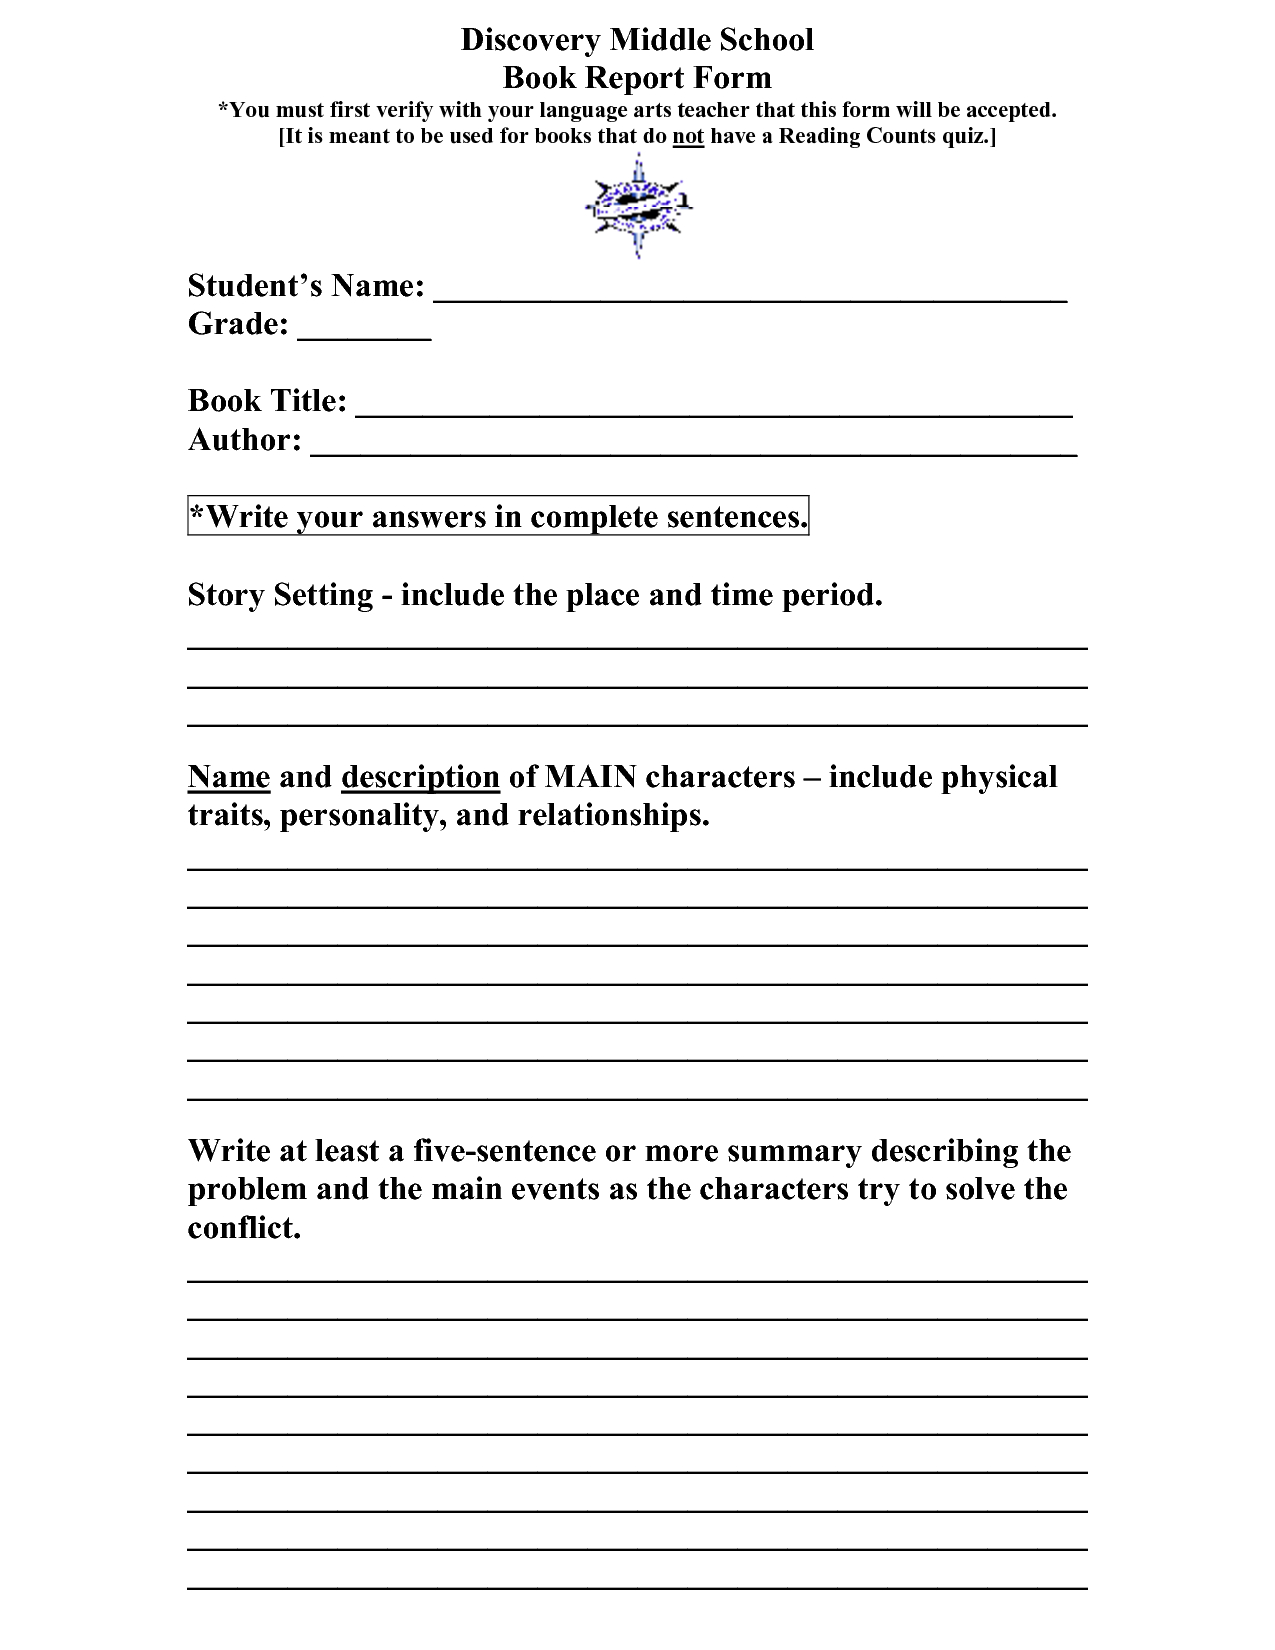 Scope Of Work Template | Teaching & Learning | High School In Book Report Template High School